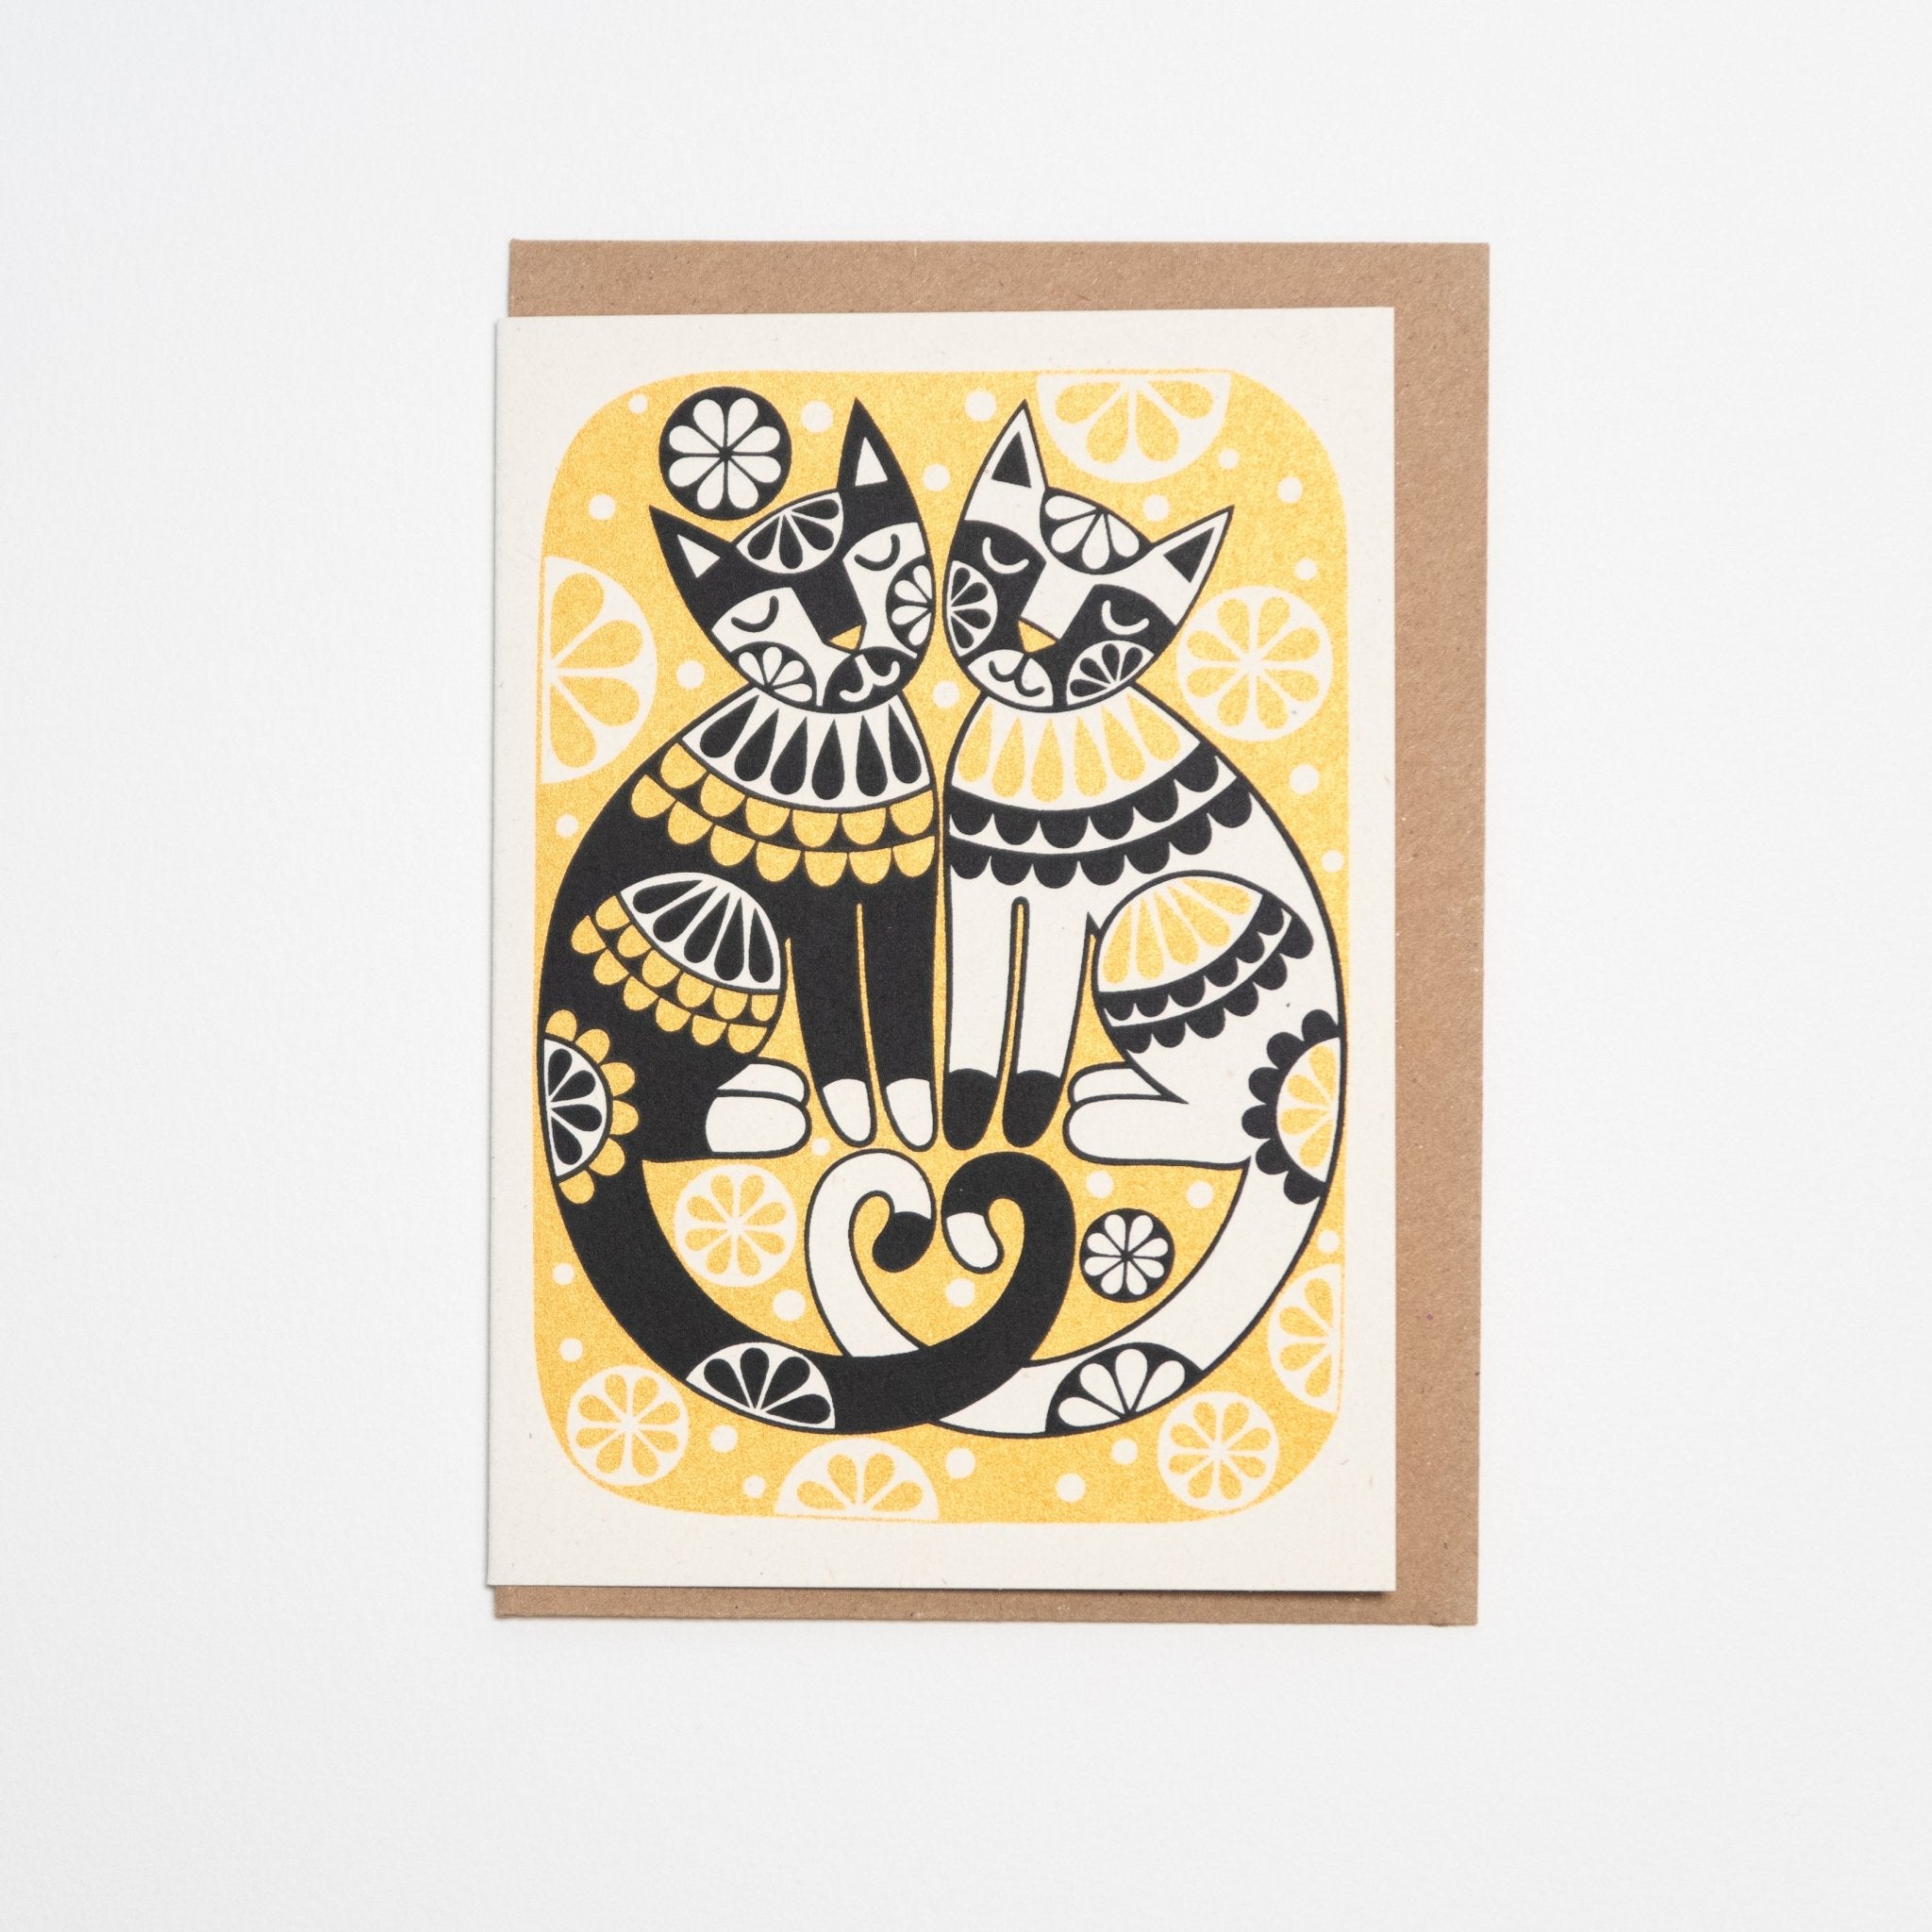 Lovecats Greeting Card